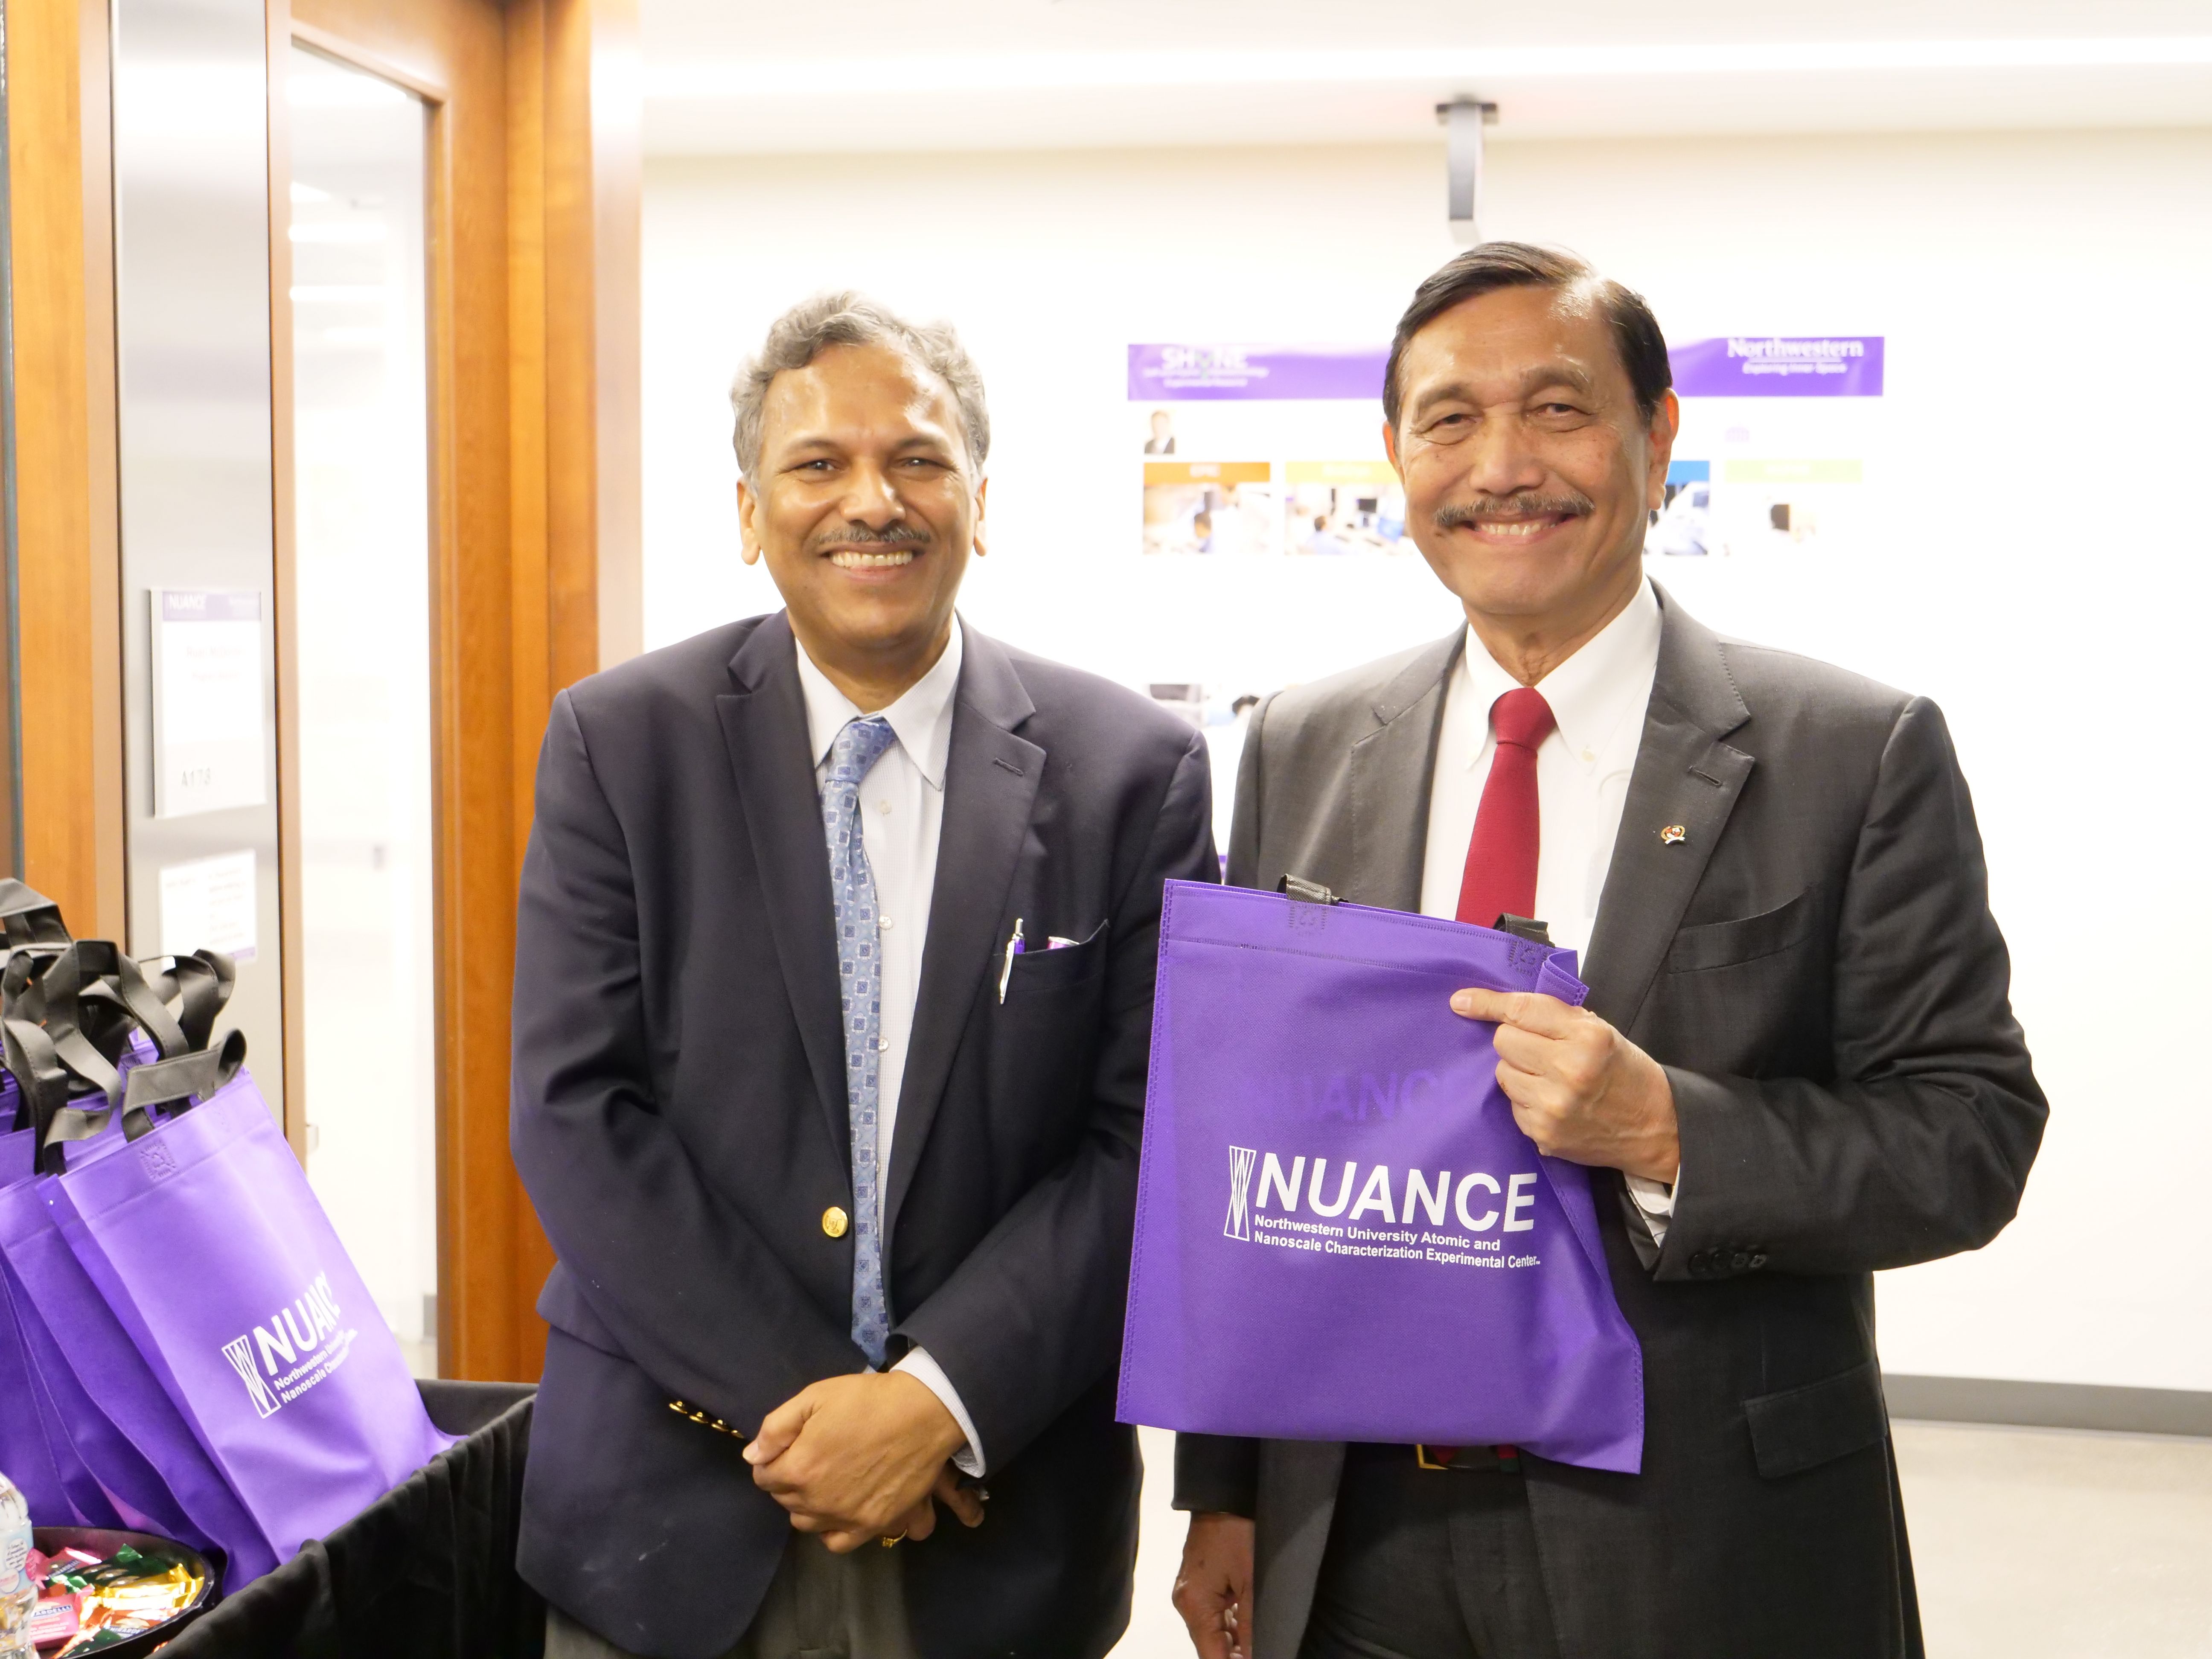 Professor Dravid with Minister Luhut of Indonisia